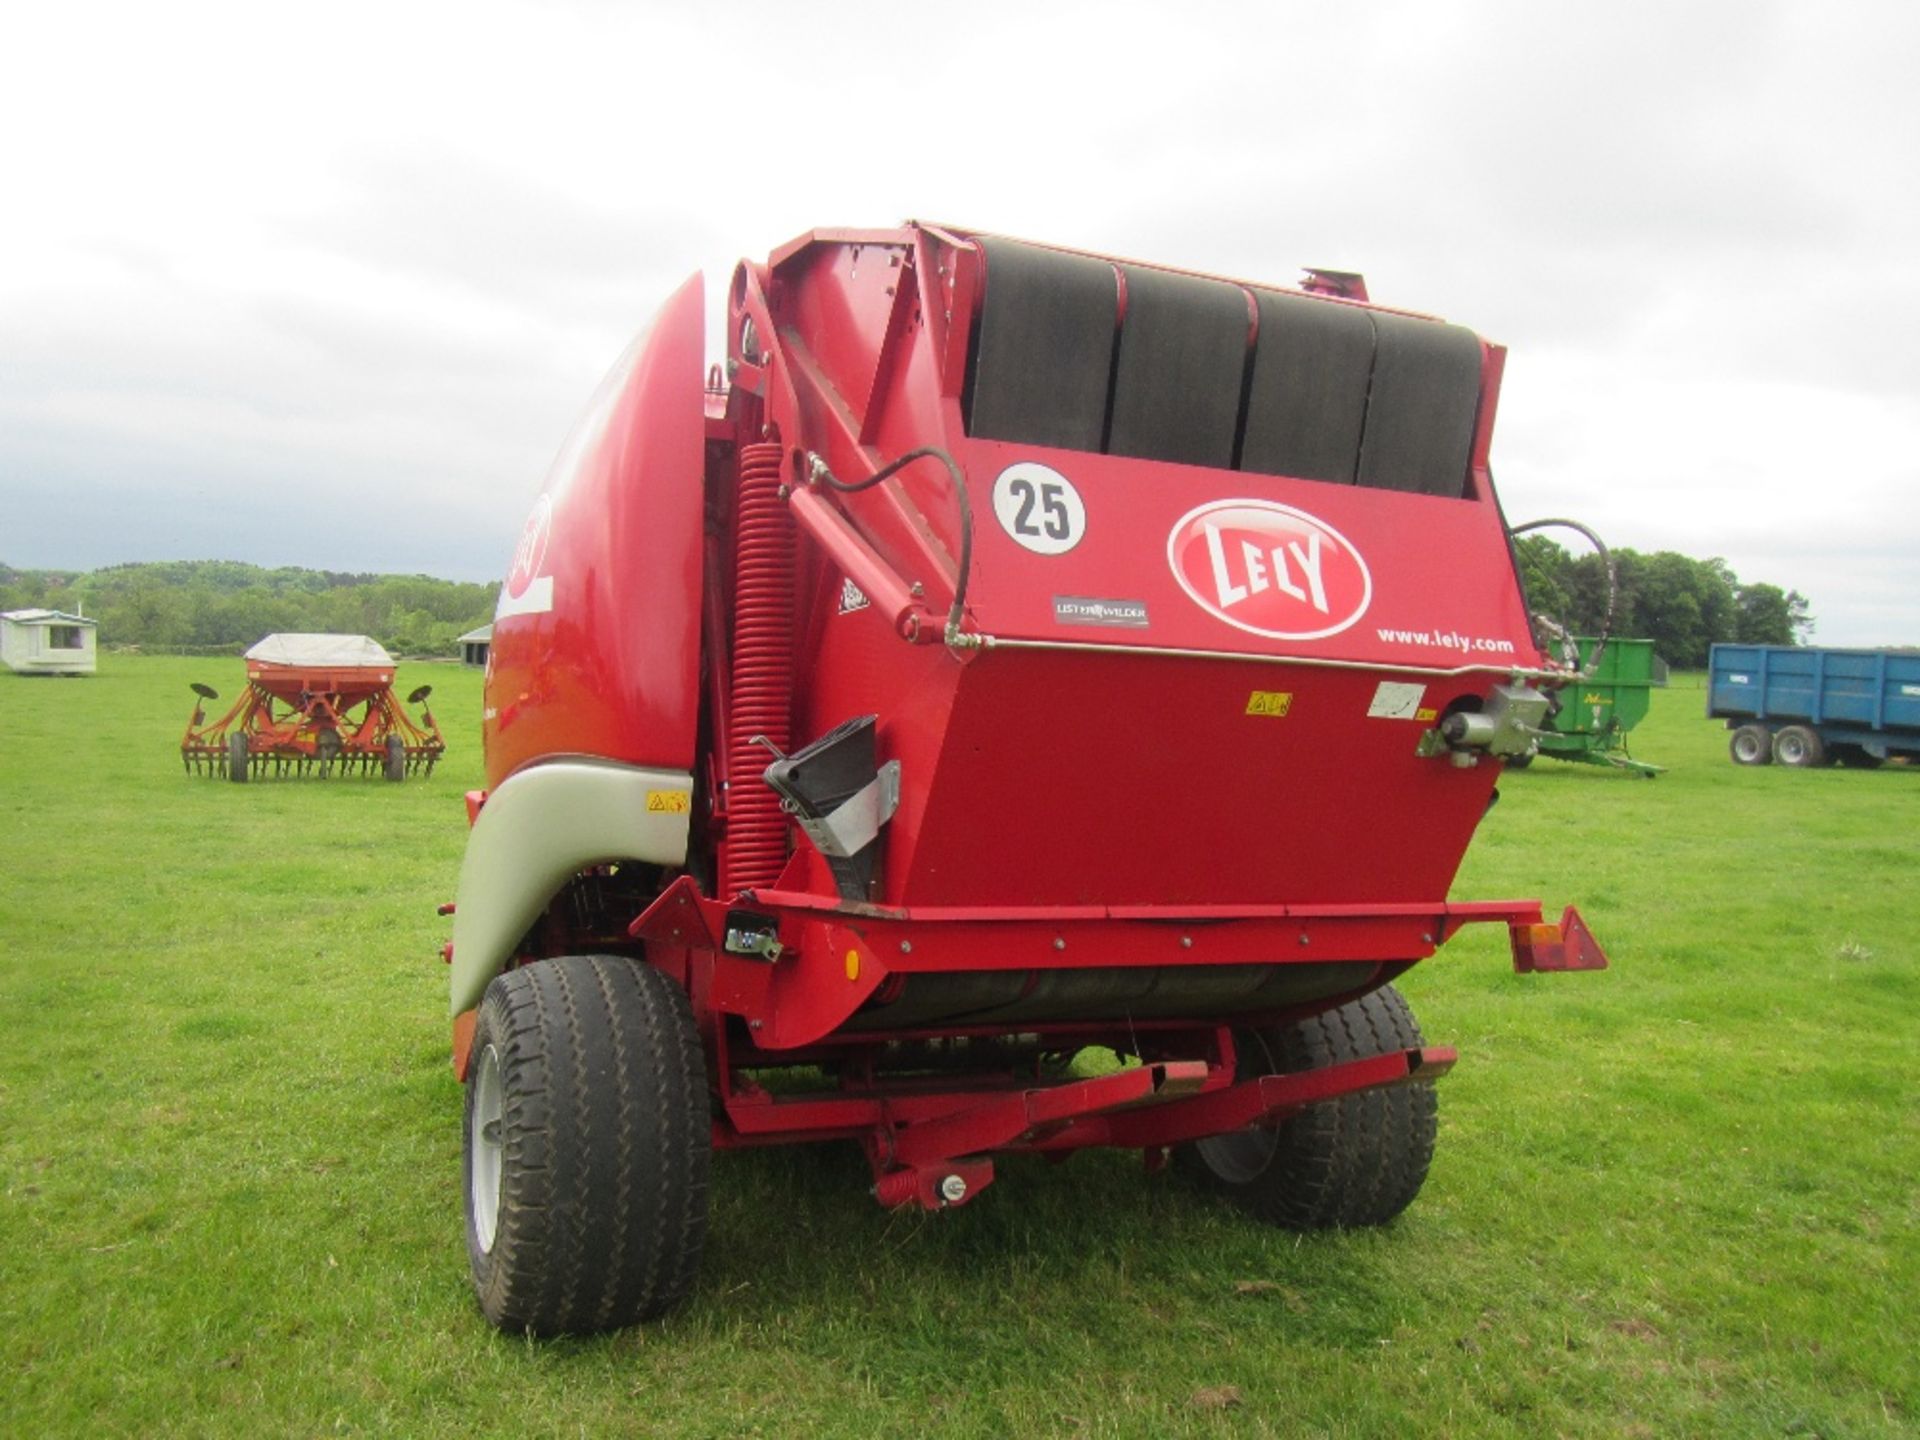 2010 Lely Welger RP435 single axle Master round baler, auto lube, wide pick up, fitted with chopper - Image 3 of 6